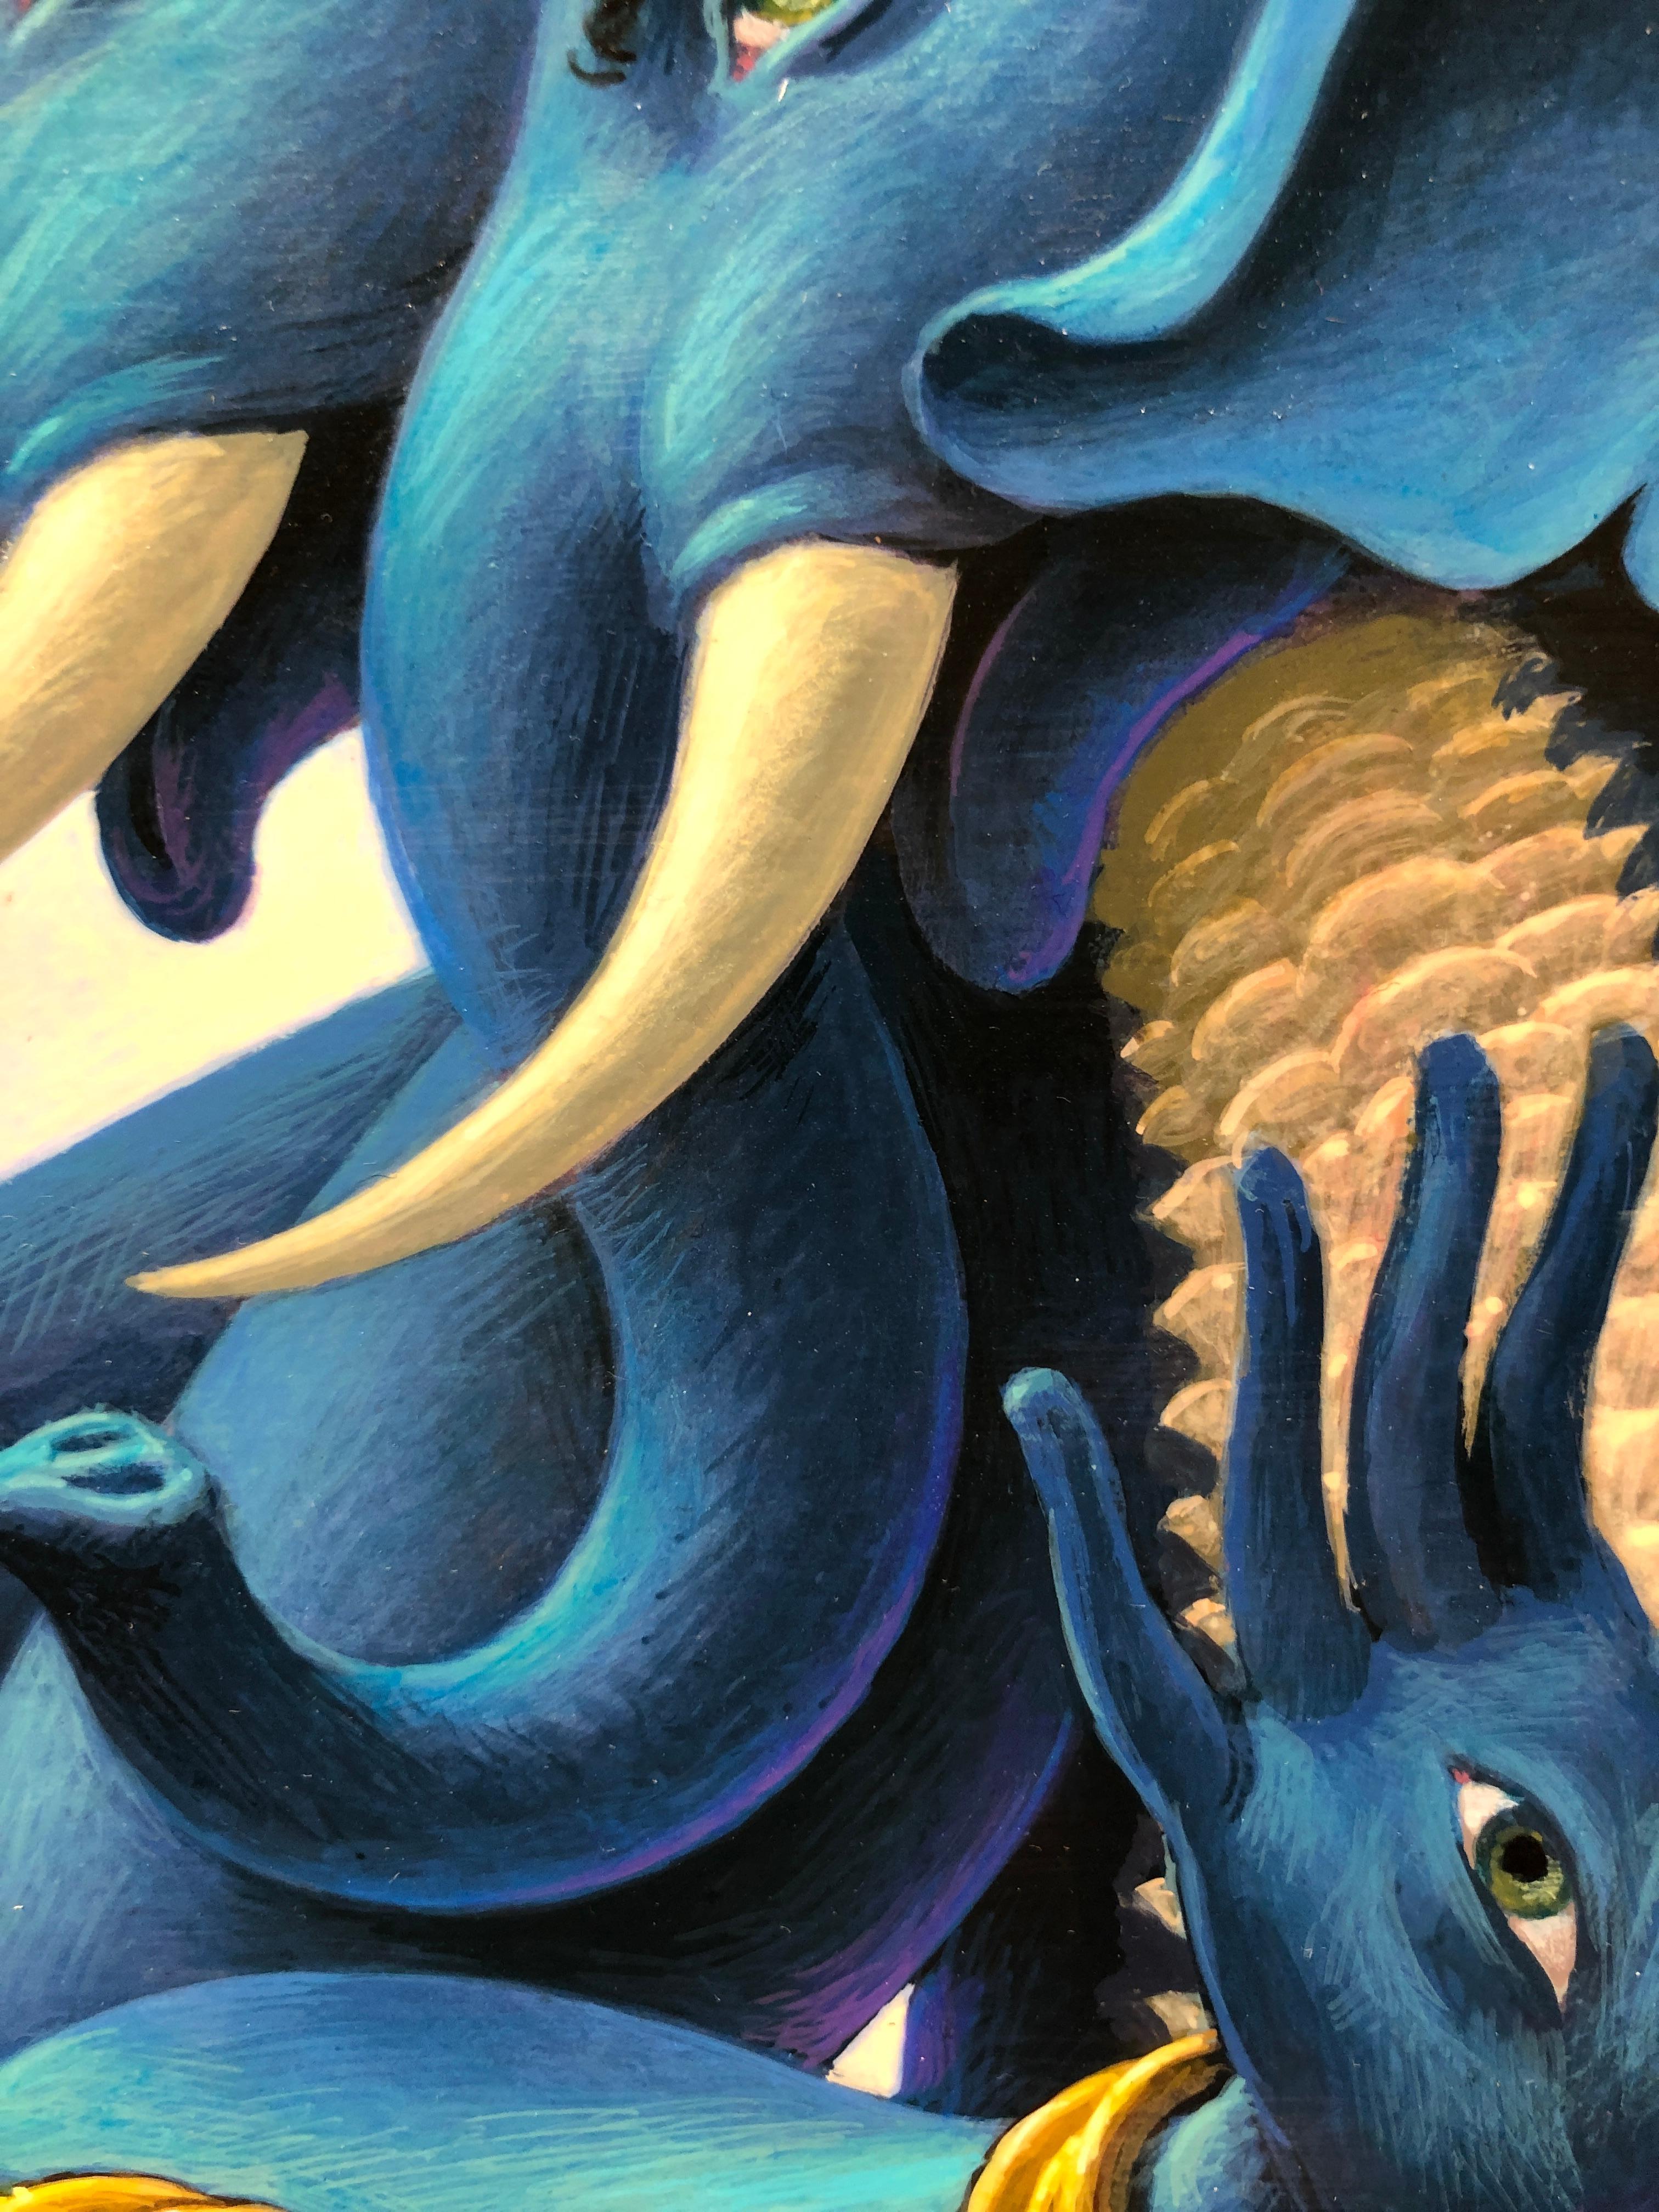 Ganesh at the Maelstrom - Highly Detailed Surreal, Symbolic Painting 13